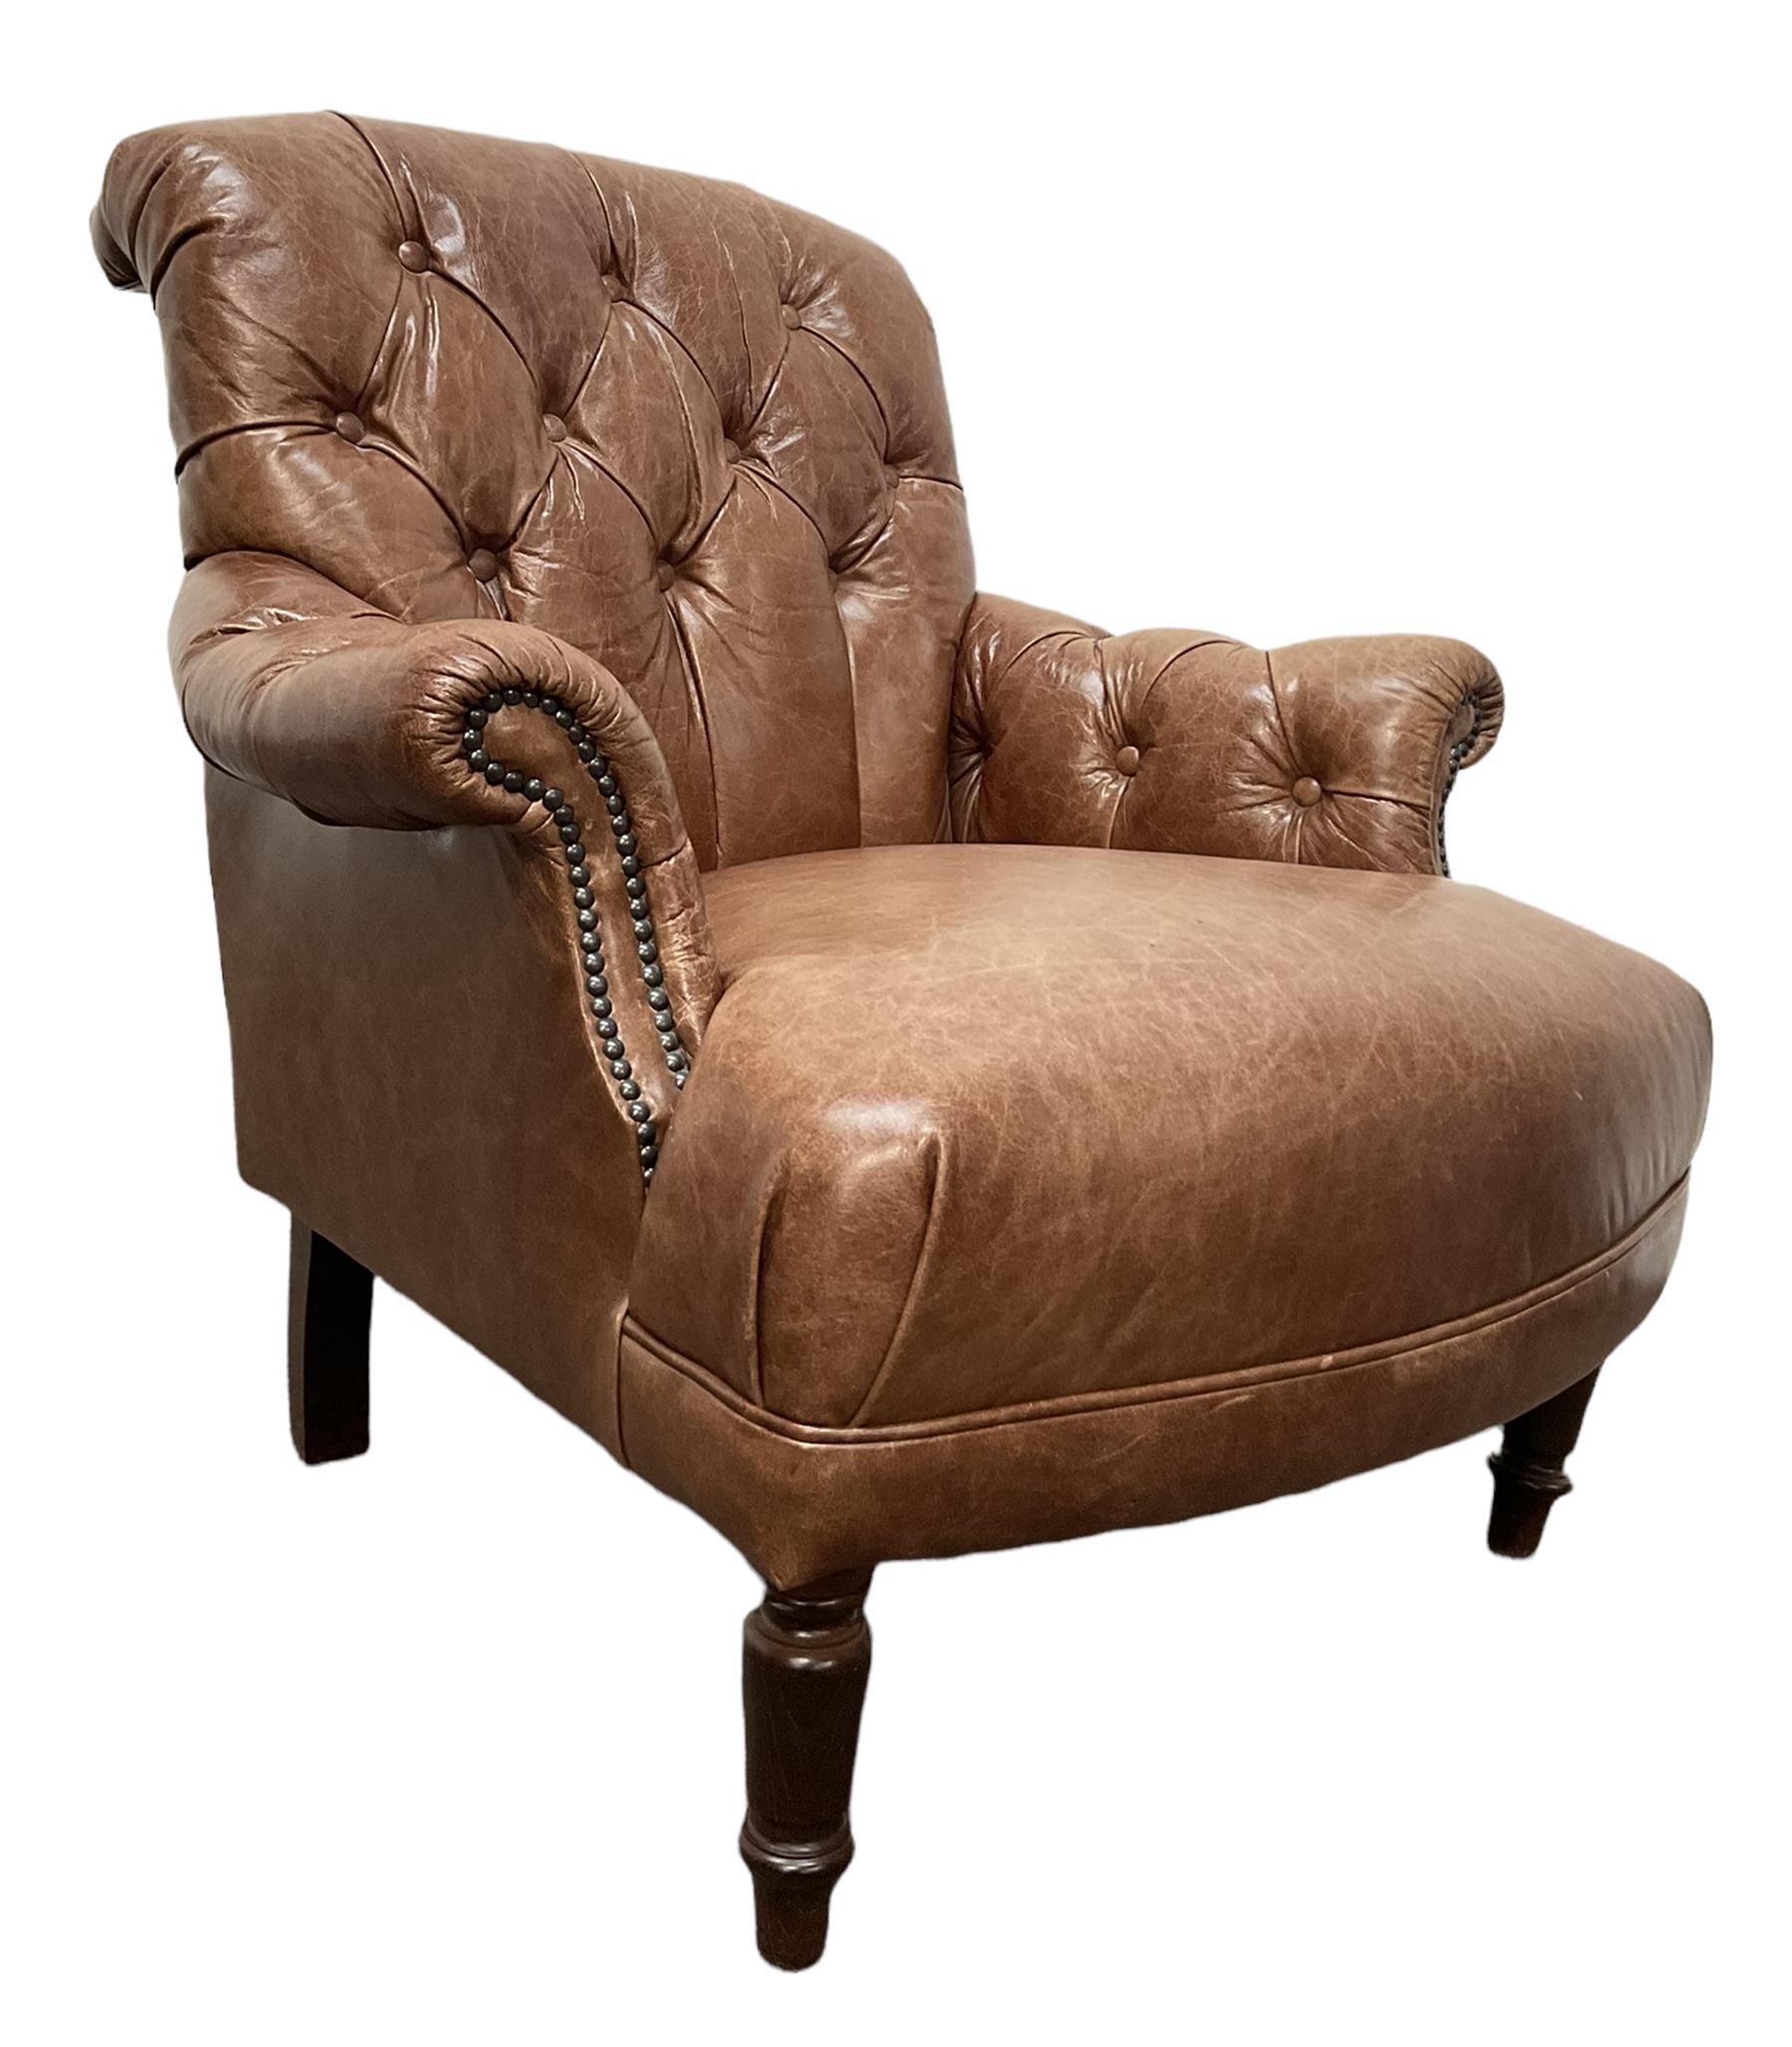 Tetrad - tub shaped armchair upholstered in buttoned tan leather